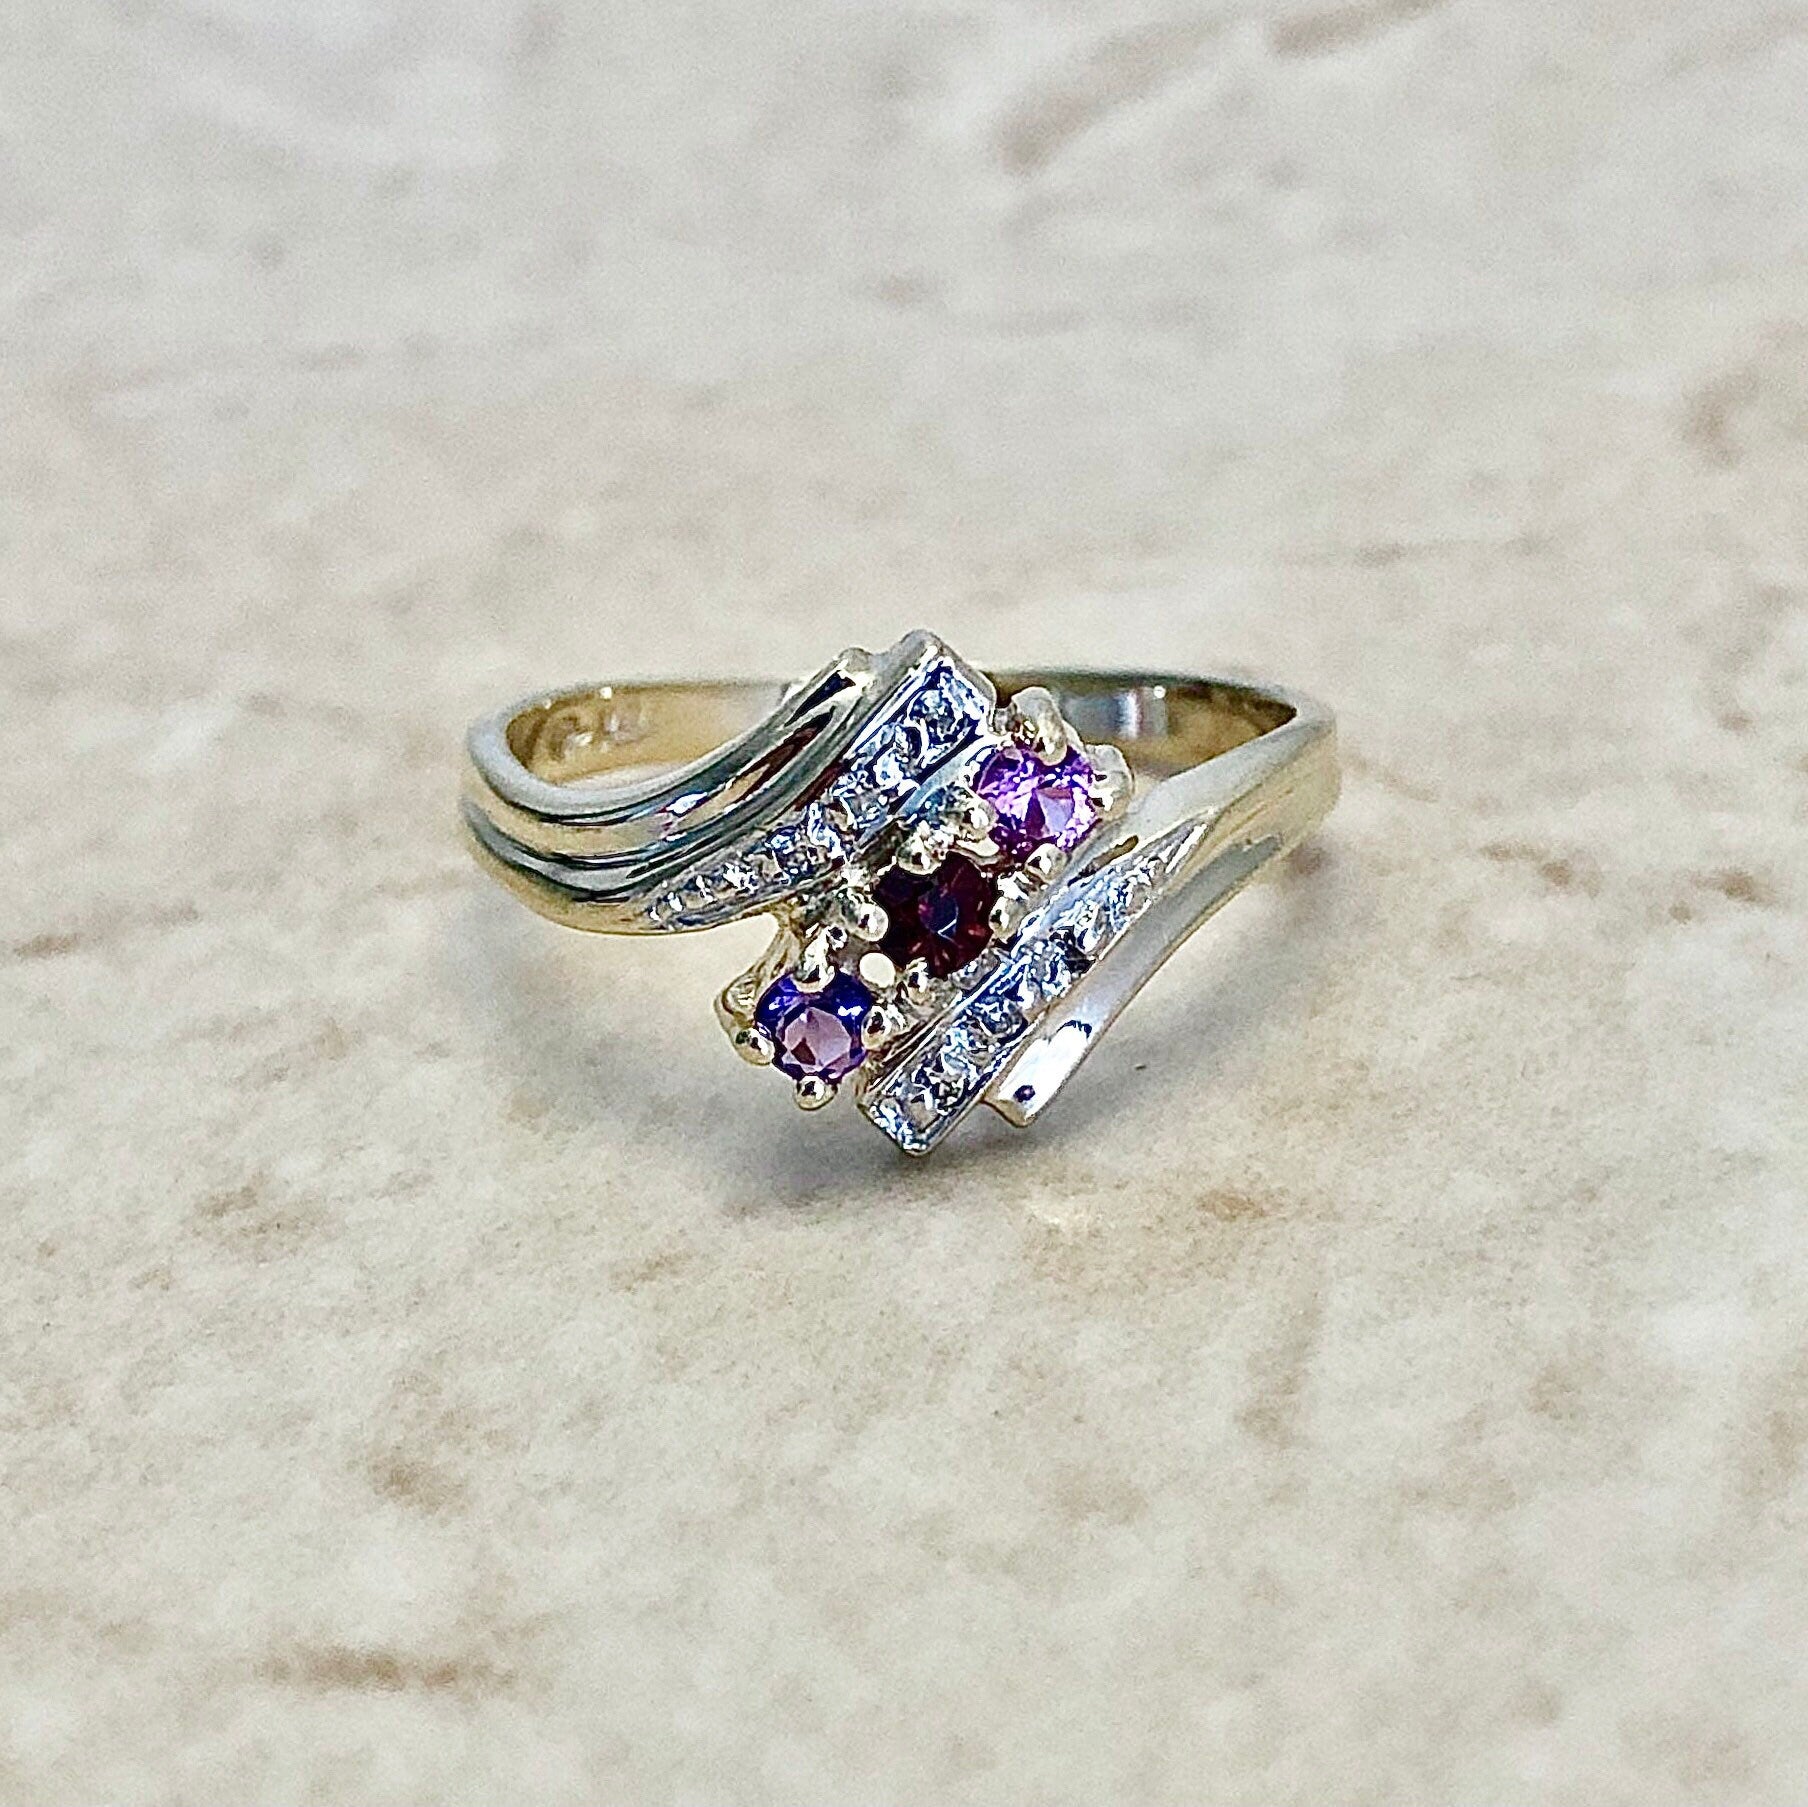 10K Amethyst, Garnet, Tourmaline & Diamond Mother’s Ring - Two Tone Gold Cocktail Ring - January February October Birthstone Gift